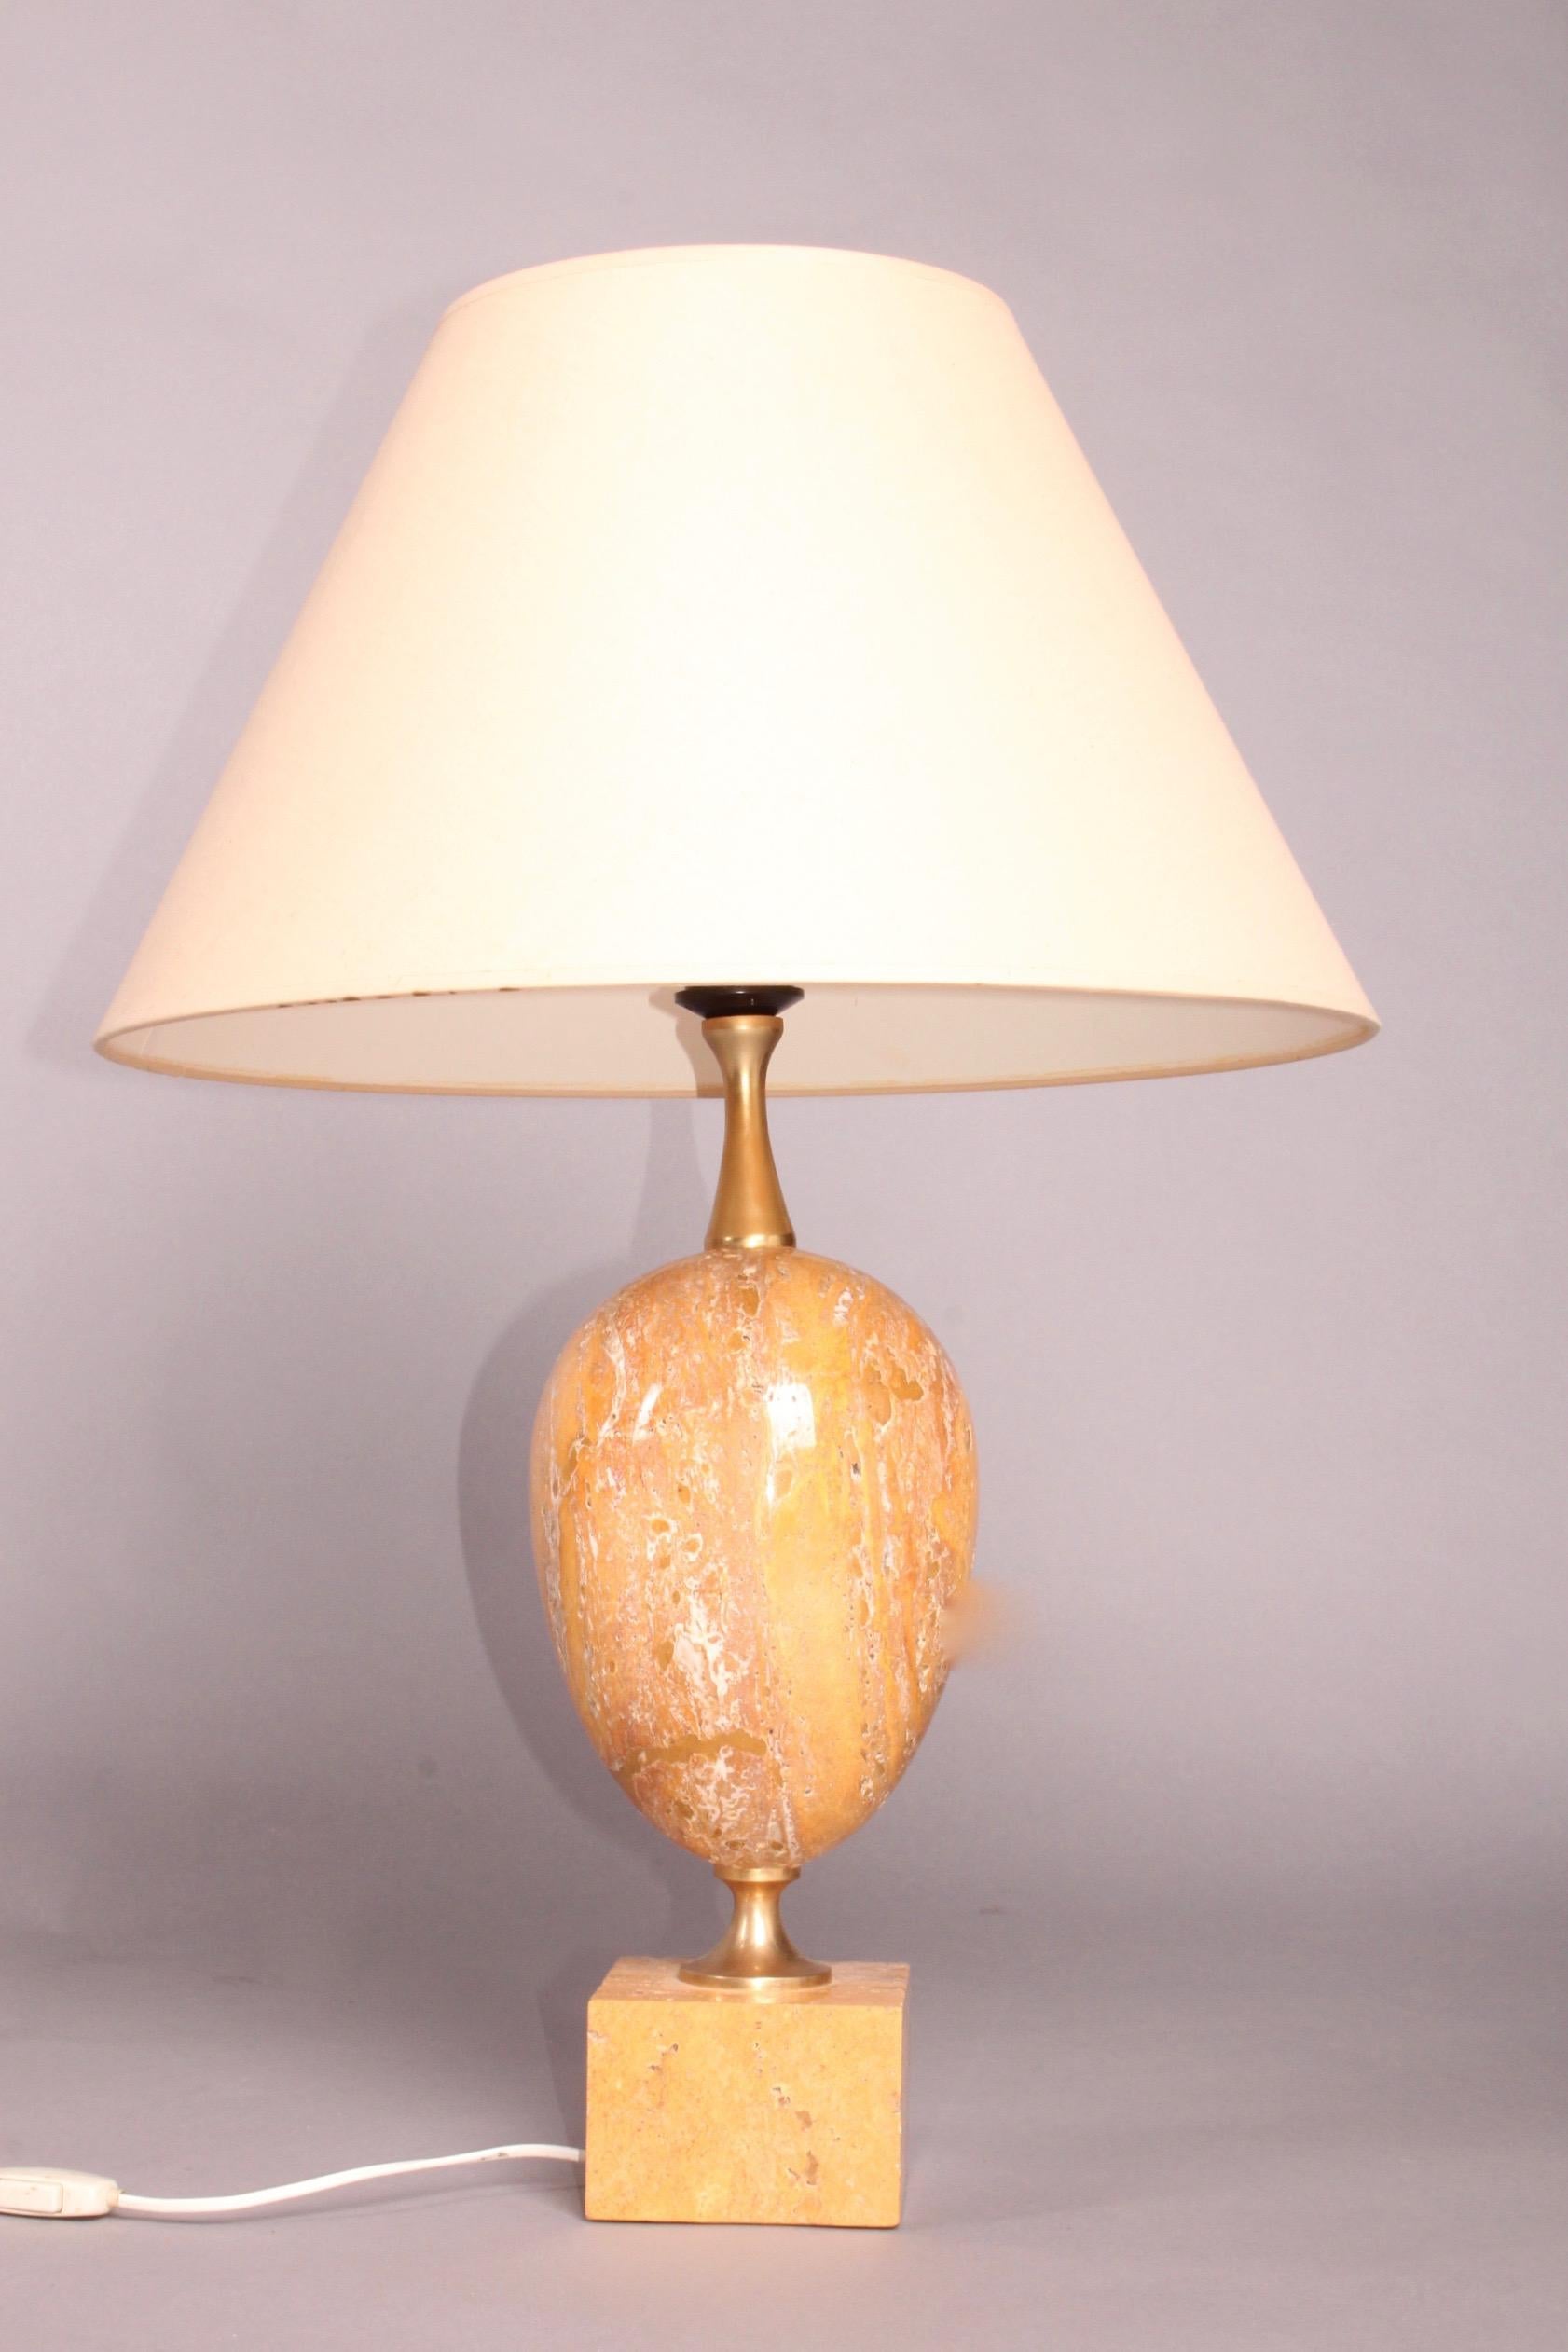 Great lamp in orange travertine by Barbier, dimensions with out shade height 56, diameter 20 cm.